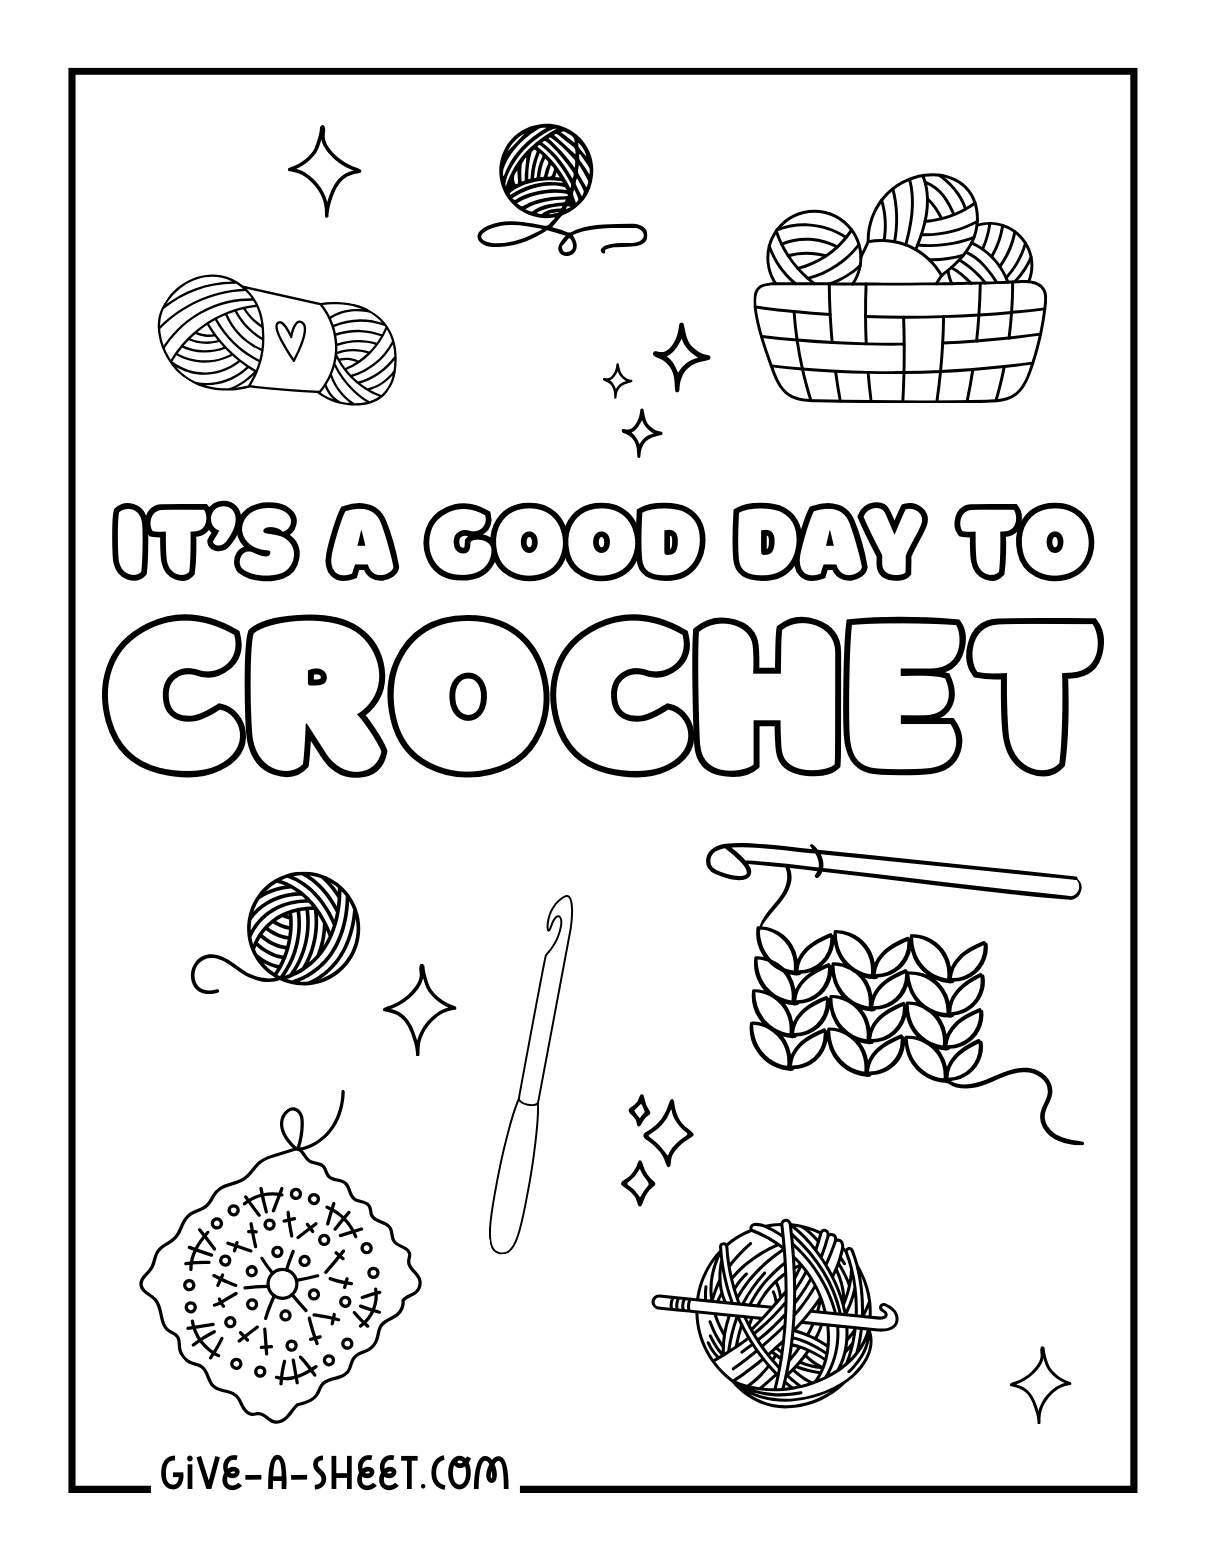 Crochet and Knitting craftsmanship coloring page.